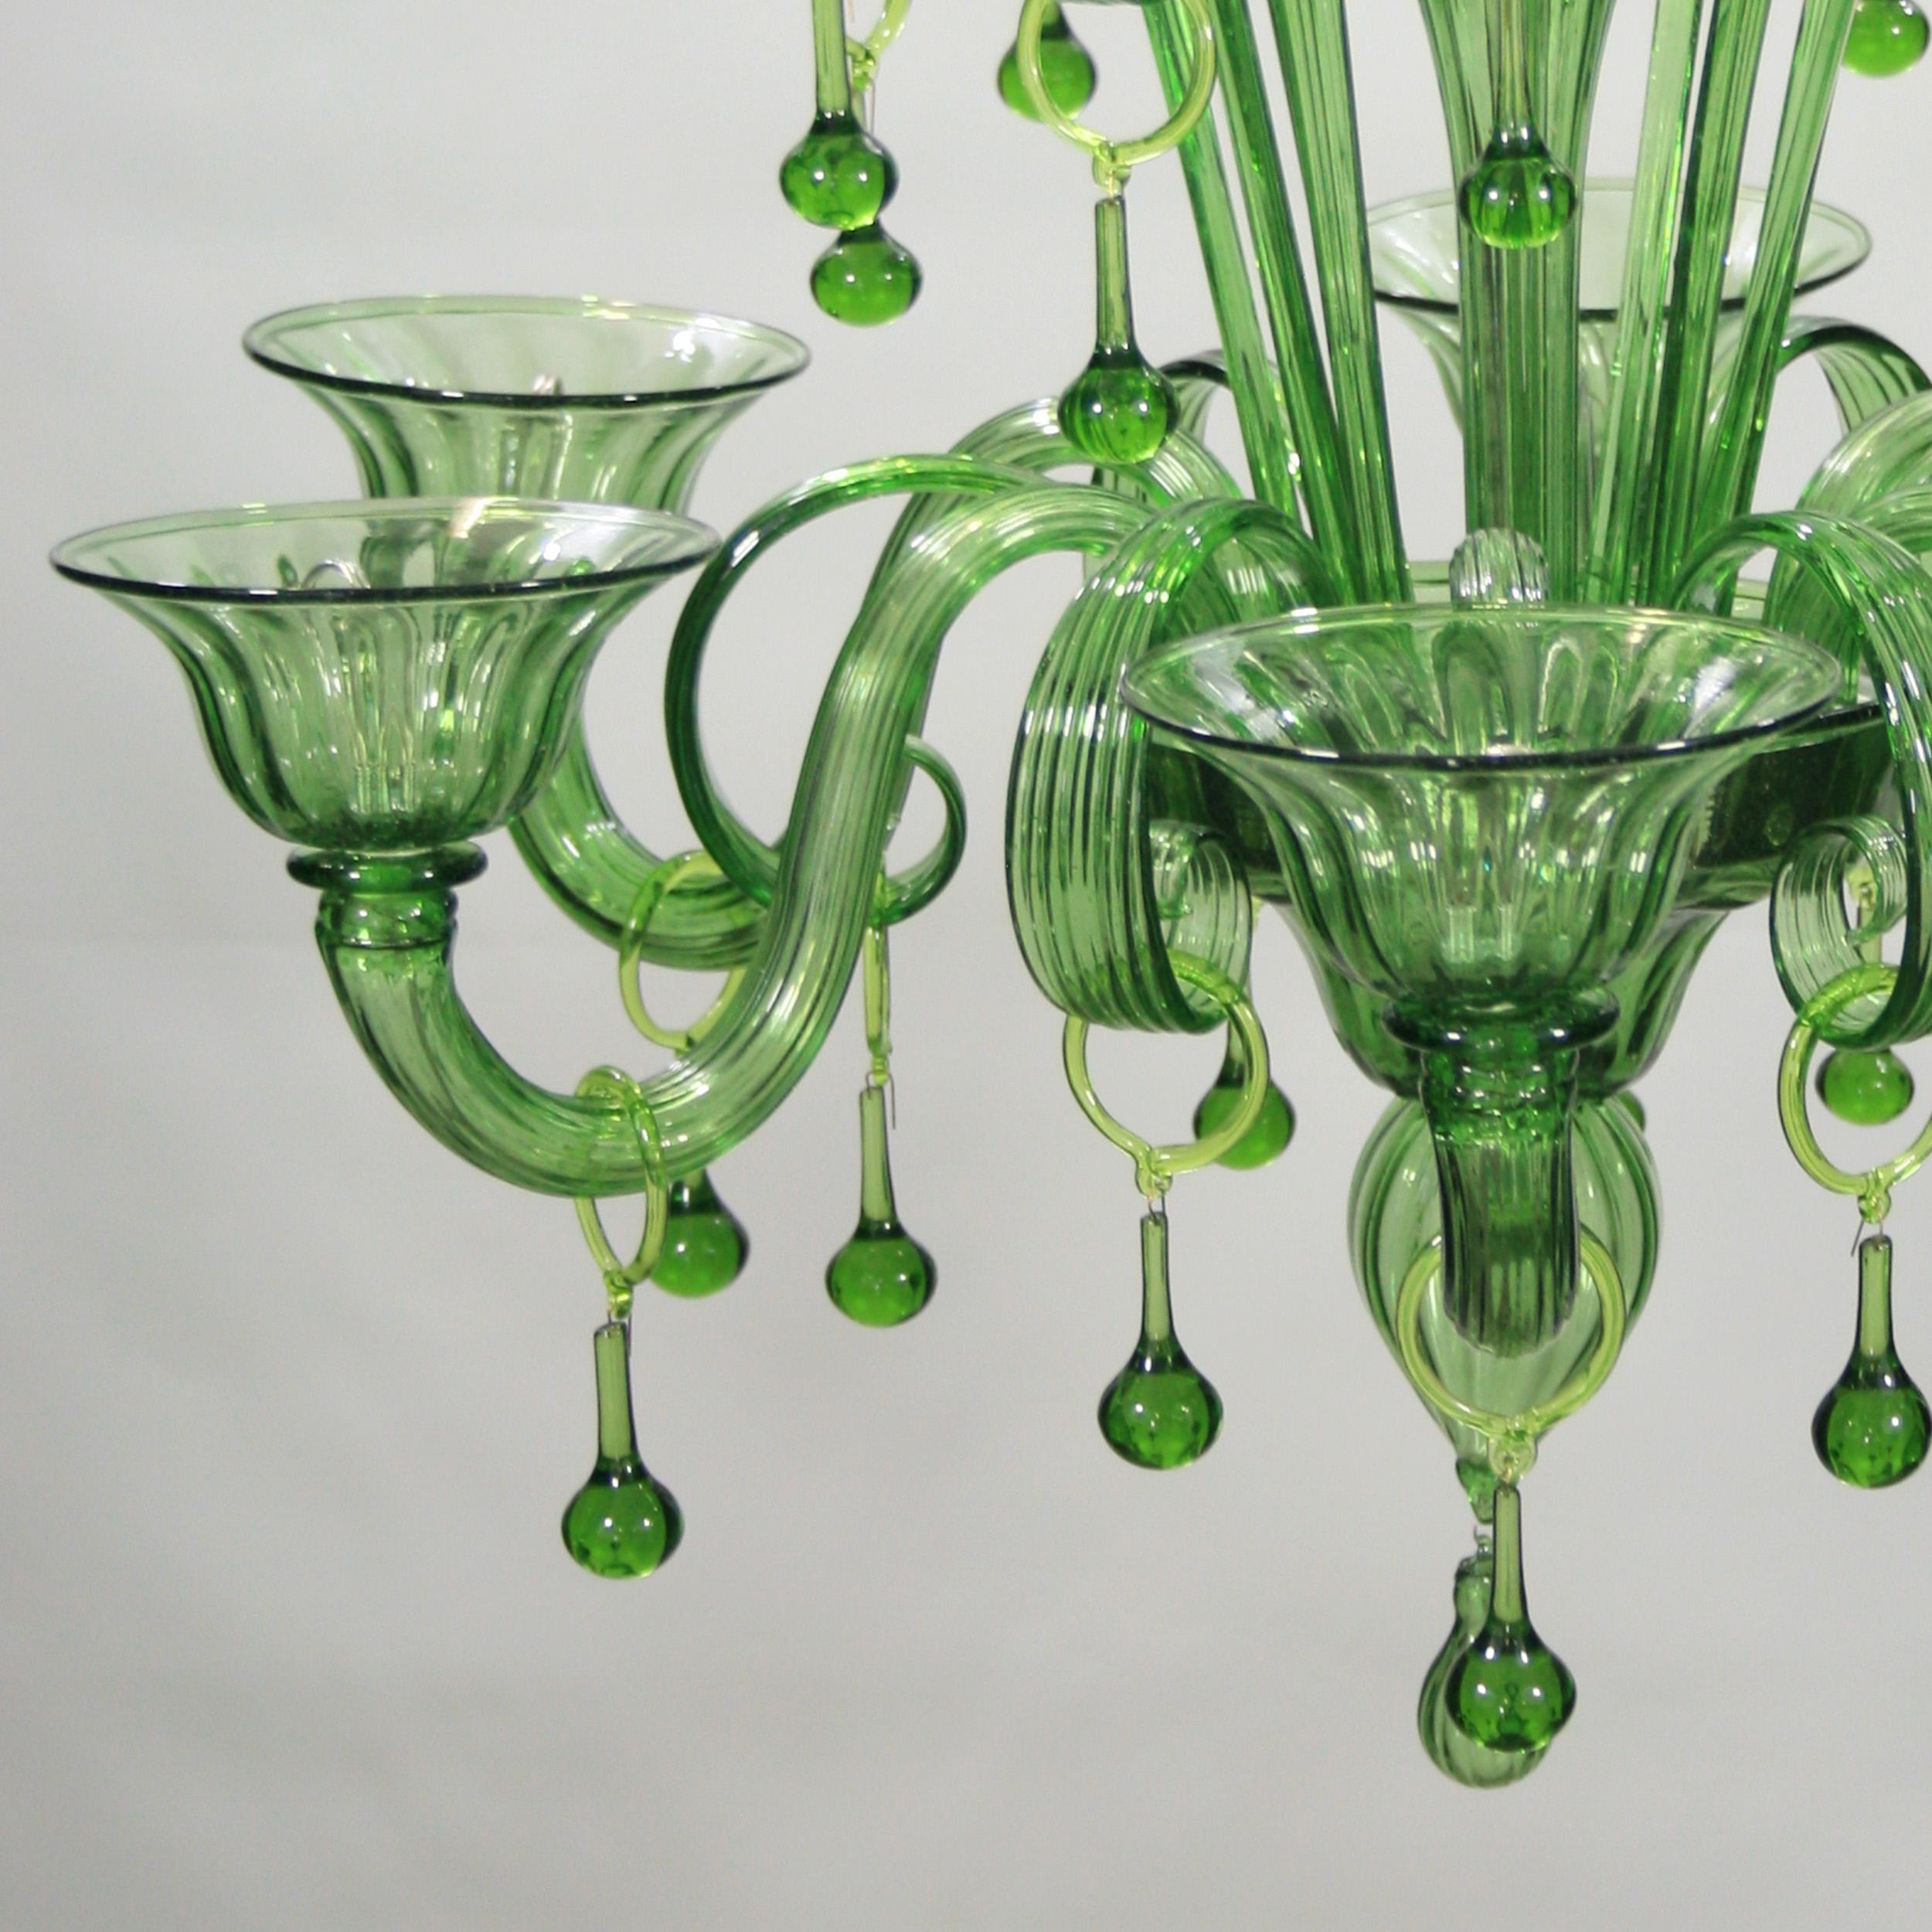 Italian Rich Chandelier 6 Arms Green Handblown Artistic Murano Glass by Multiforme For Sale